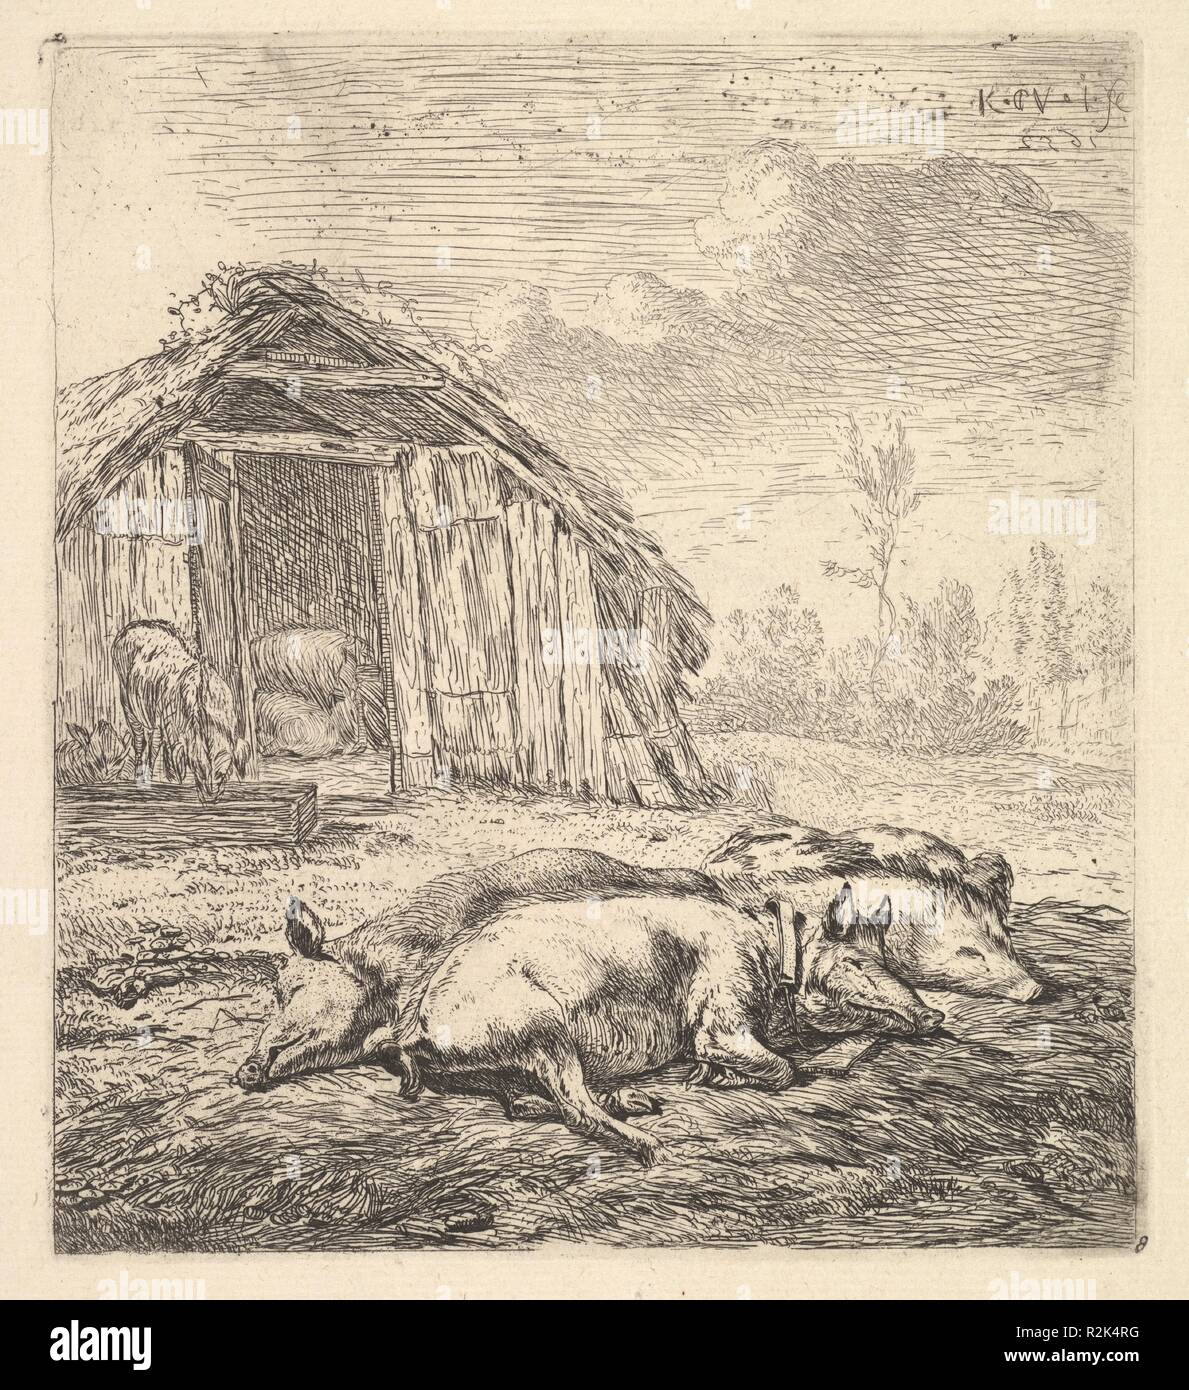 Three pigs lying on their sides, a pigsty and trough beyond. Artist: Karel Dujardin (Dutch, Amsterdam 1622-1678 Venice). Dimensions: sheet: 7 3/8 x 6 3/4 in. (18.8 x 17.2 cm). Date: 1652. Museum: Metropolitan Museum of Art, New York, USA. Stock Photo